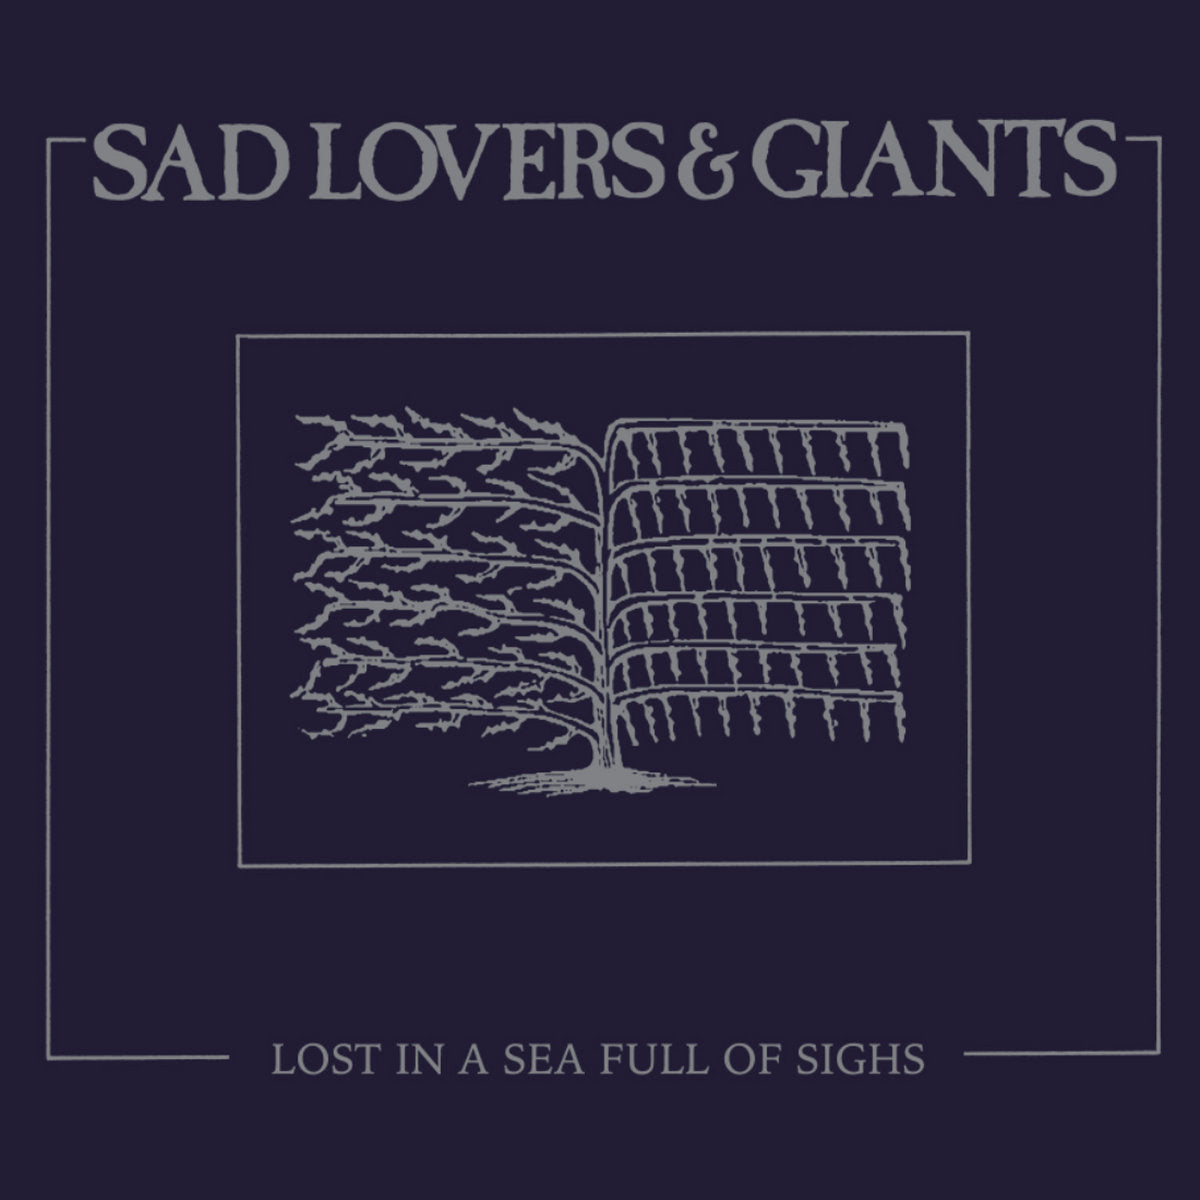 Sad Lovers and Giants "Lost In A Sea Full Of Sighs"